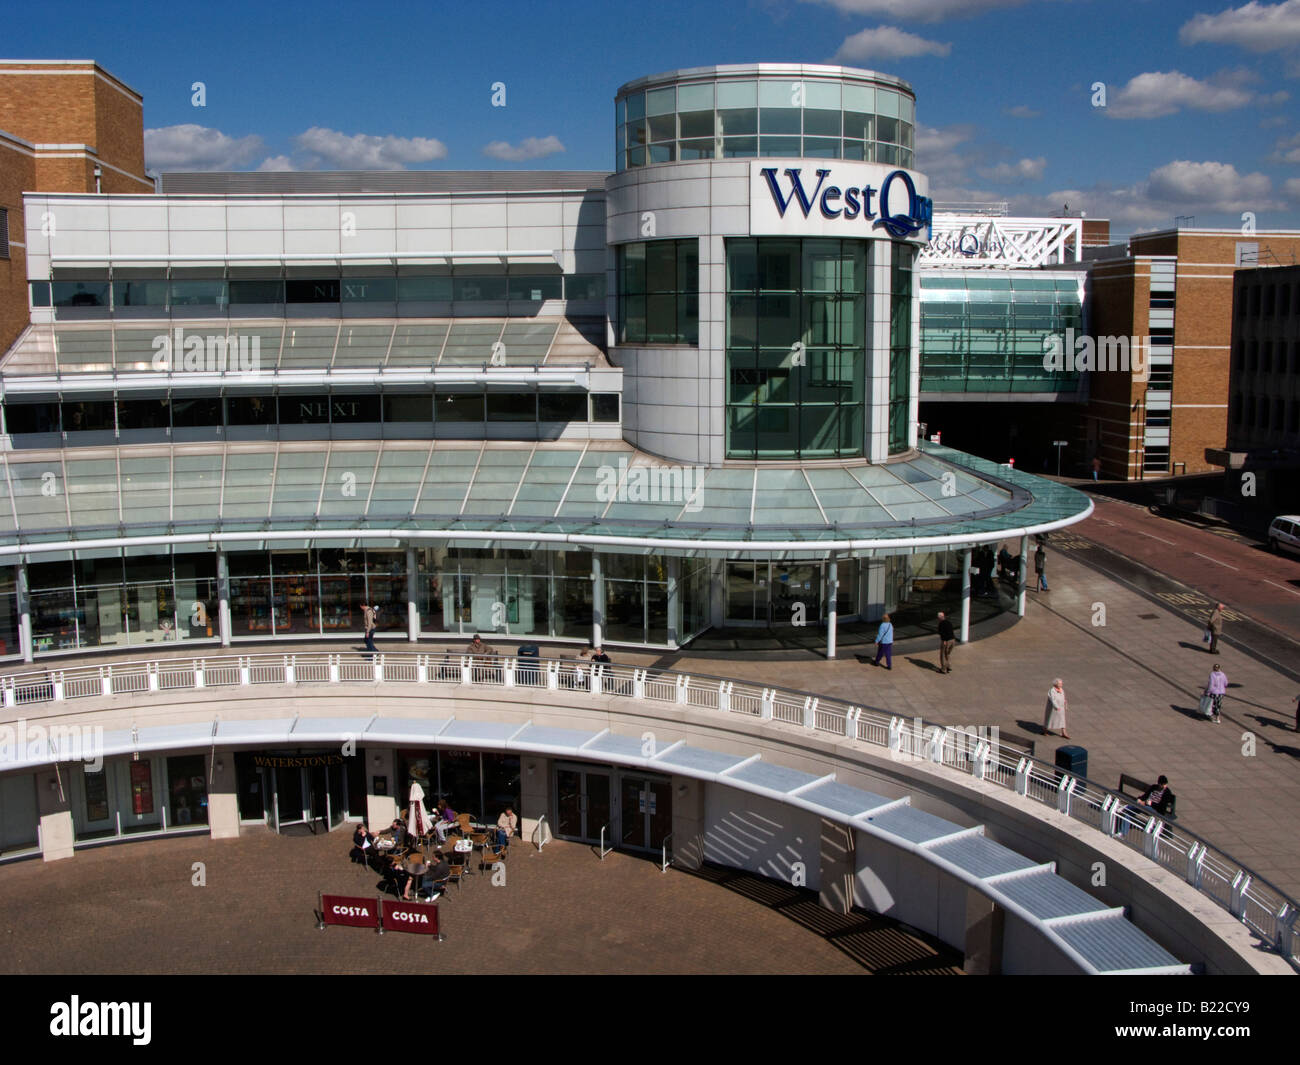 West Quay Shopping Centre Overview, Southampton, UK Stock Photo